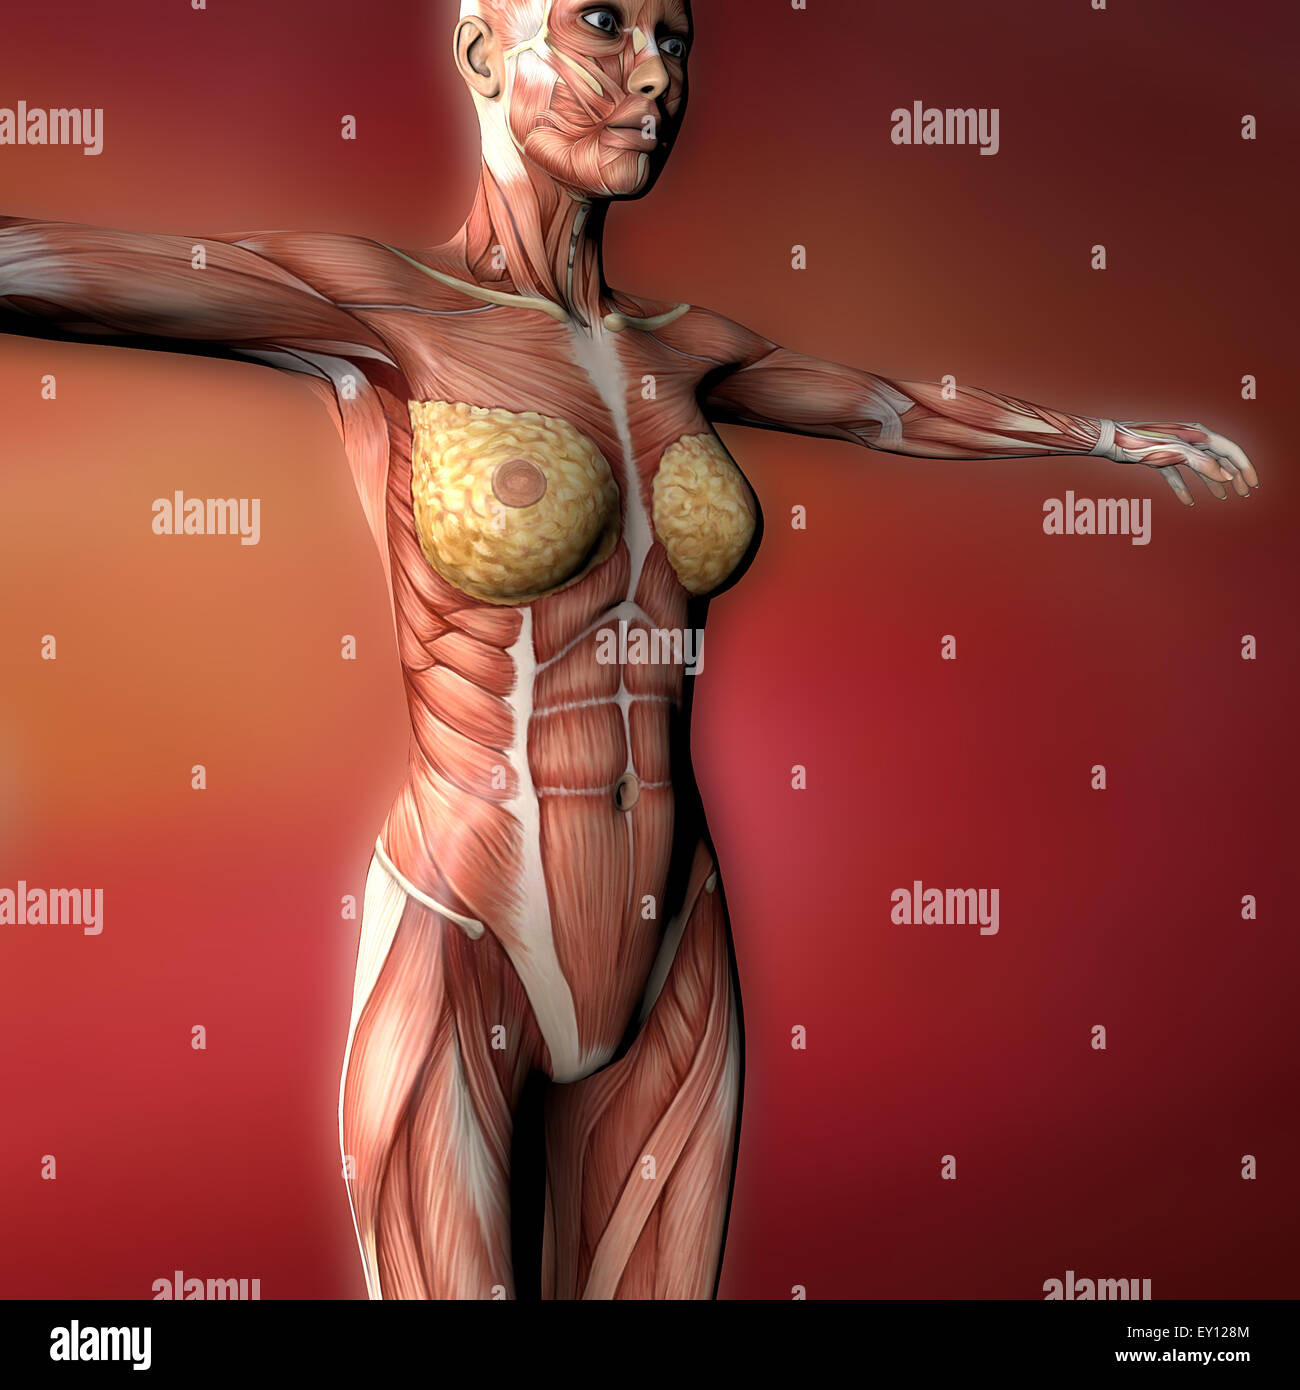 Female Chest Muscles With Labels By Hank Grebe, Chest Part Of Woman